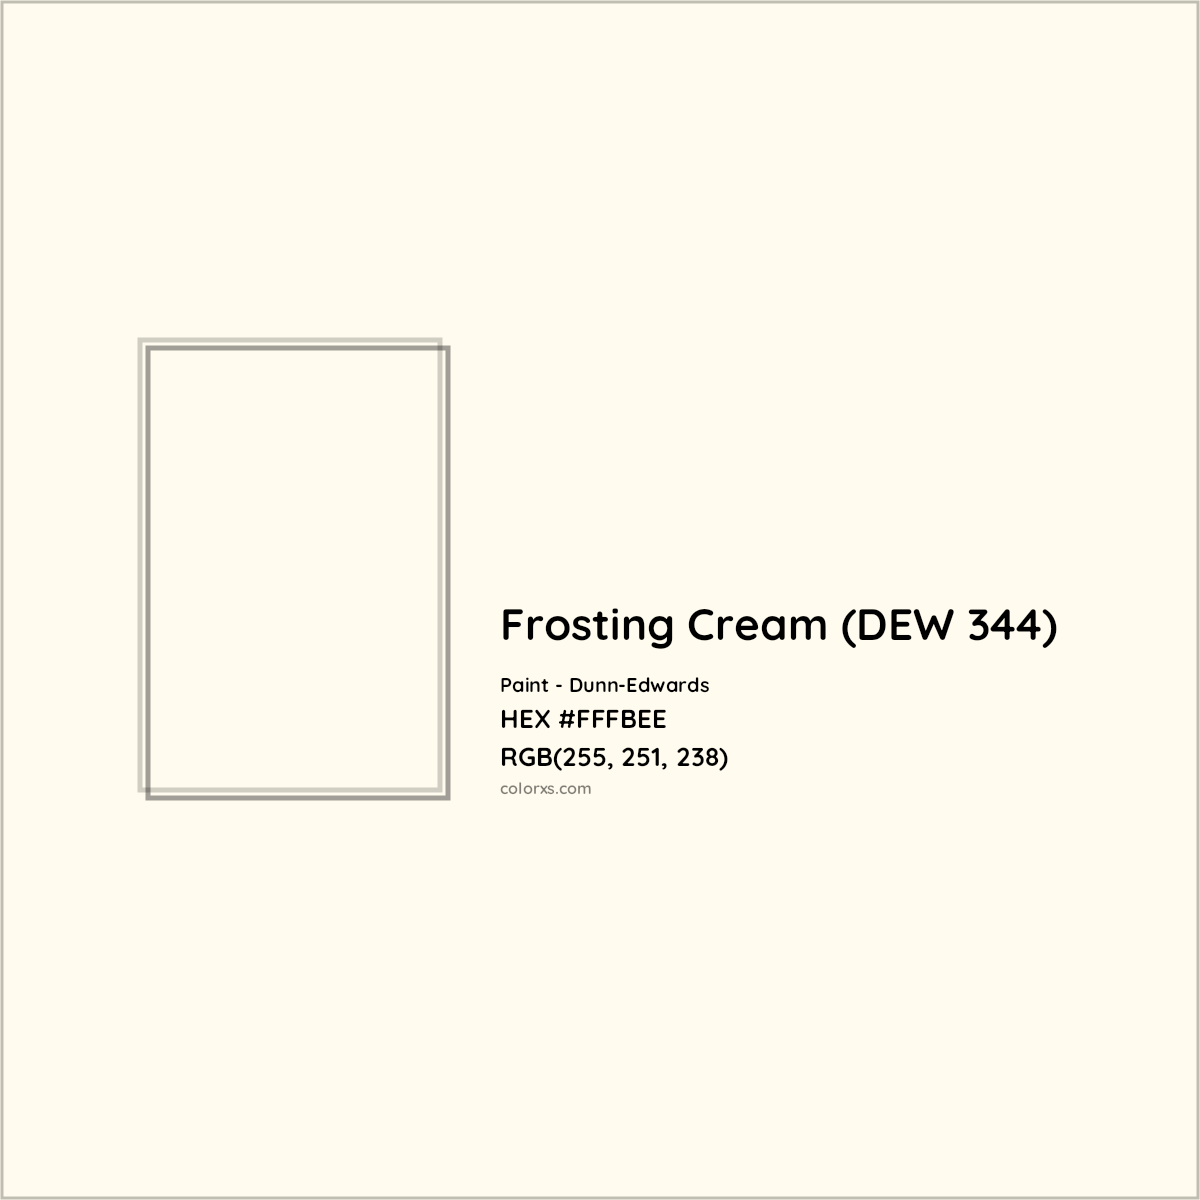 HEX #FFFBEE Frosting Cream (DEW 344) Paint Dunn-Edwards - Color Code